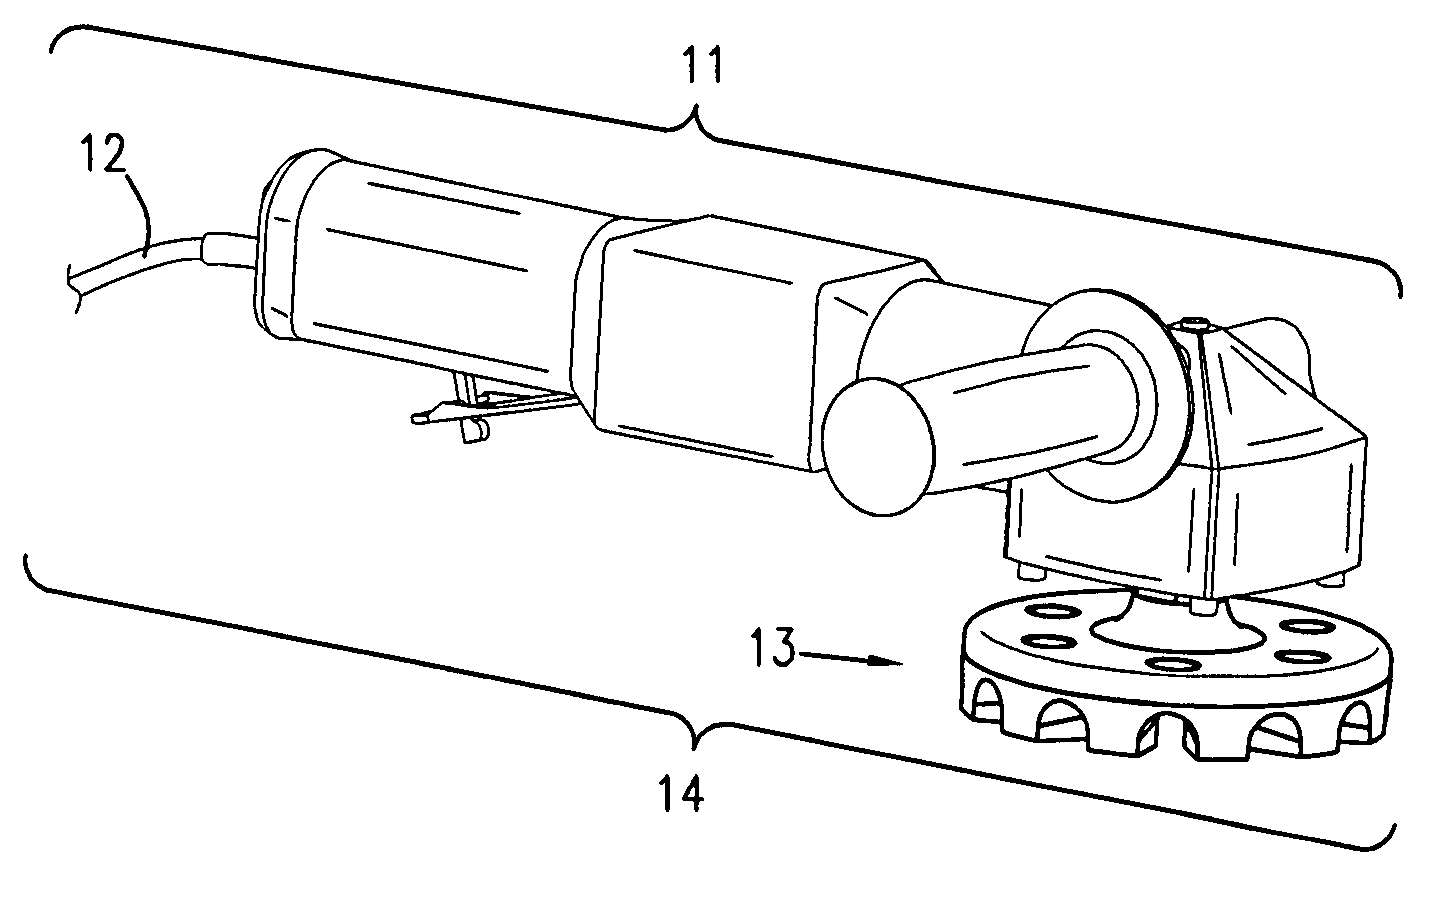 Eraser assembly for a rotary tool